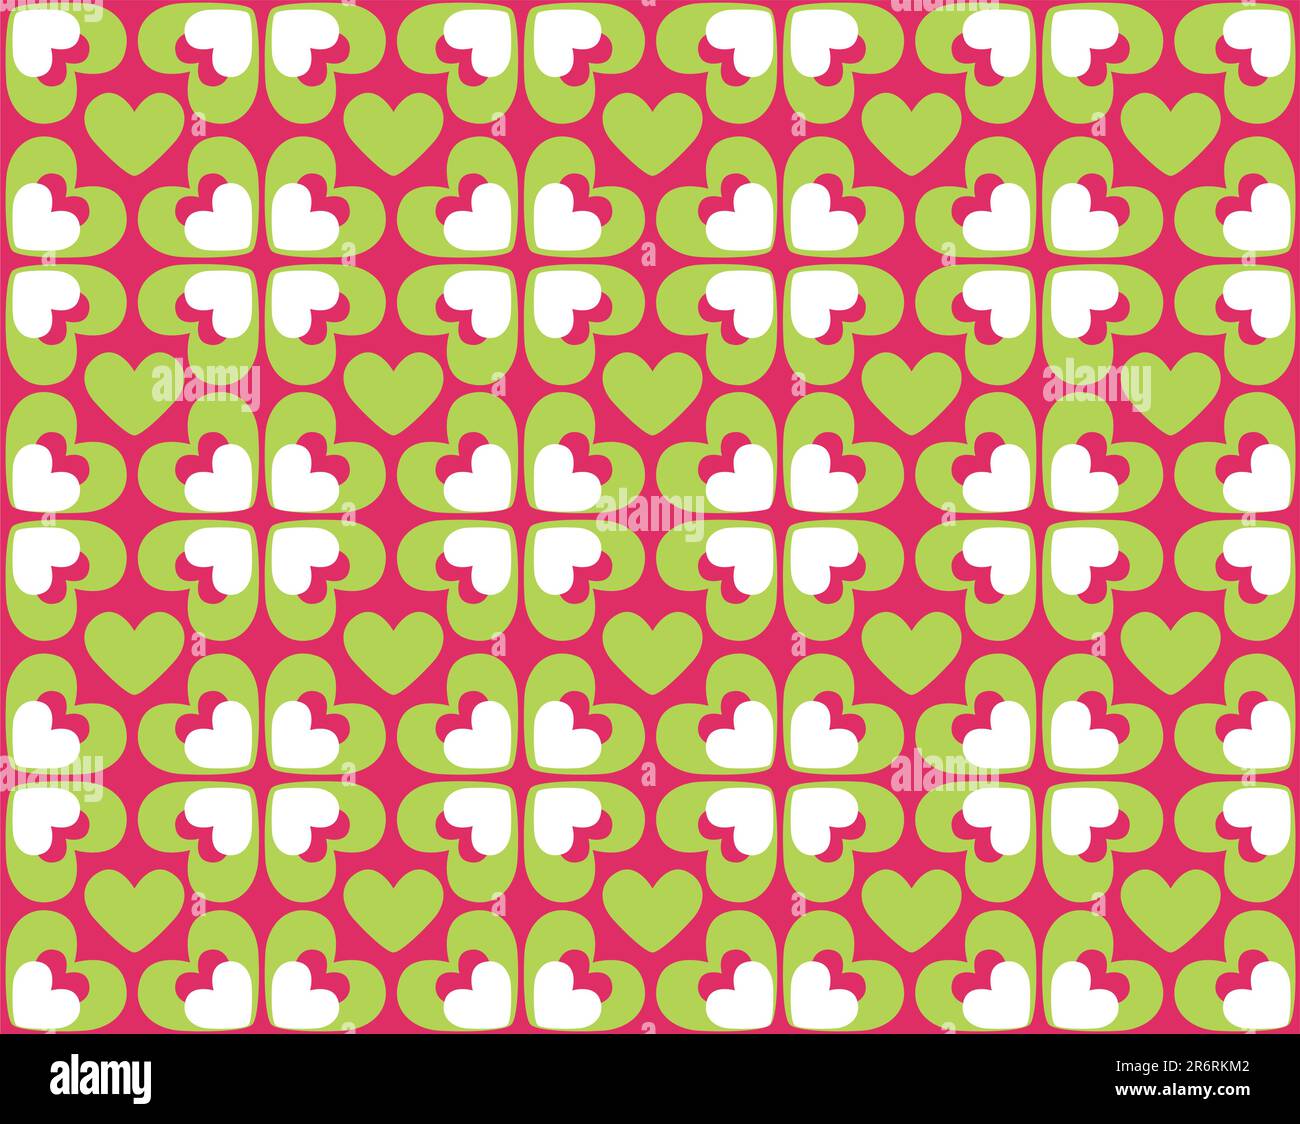 Seamless heart pattern in green, pink and white Stock Vector